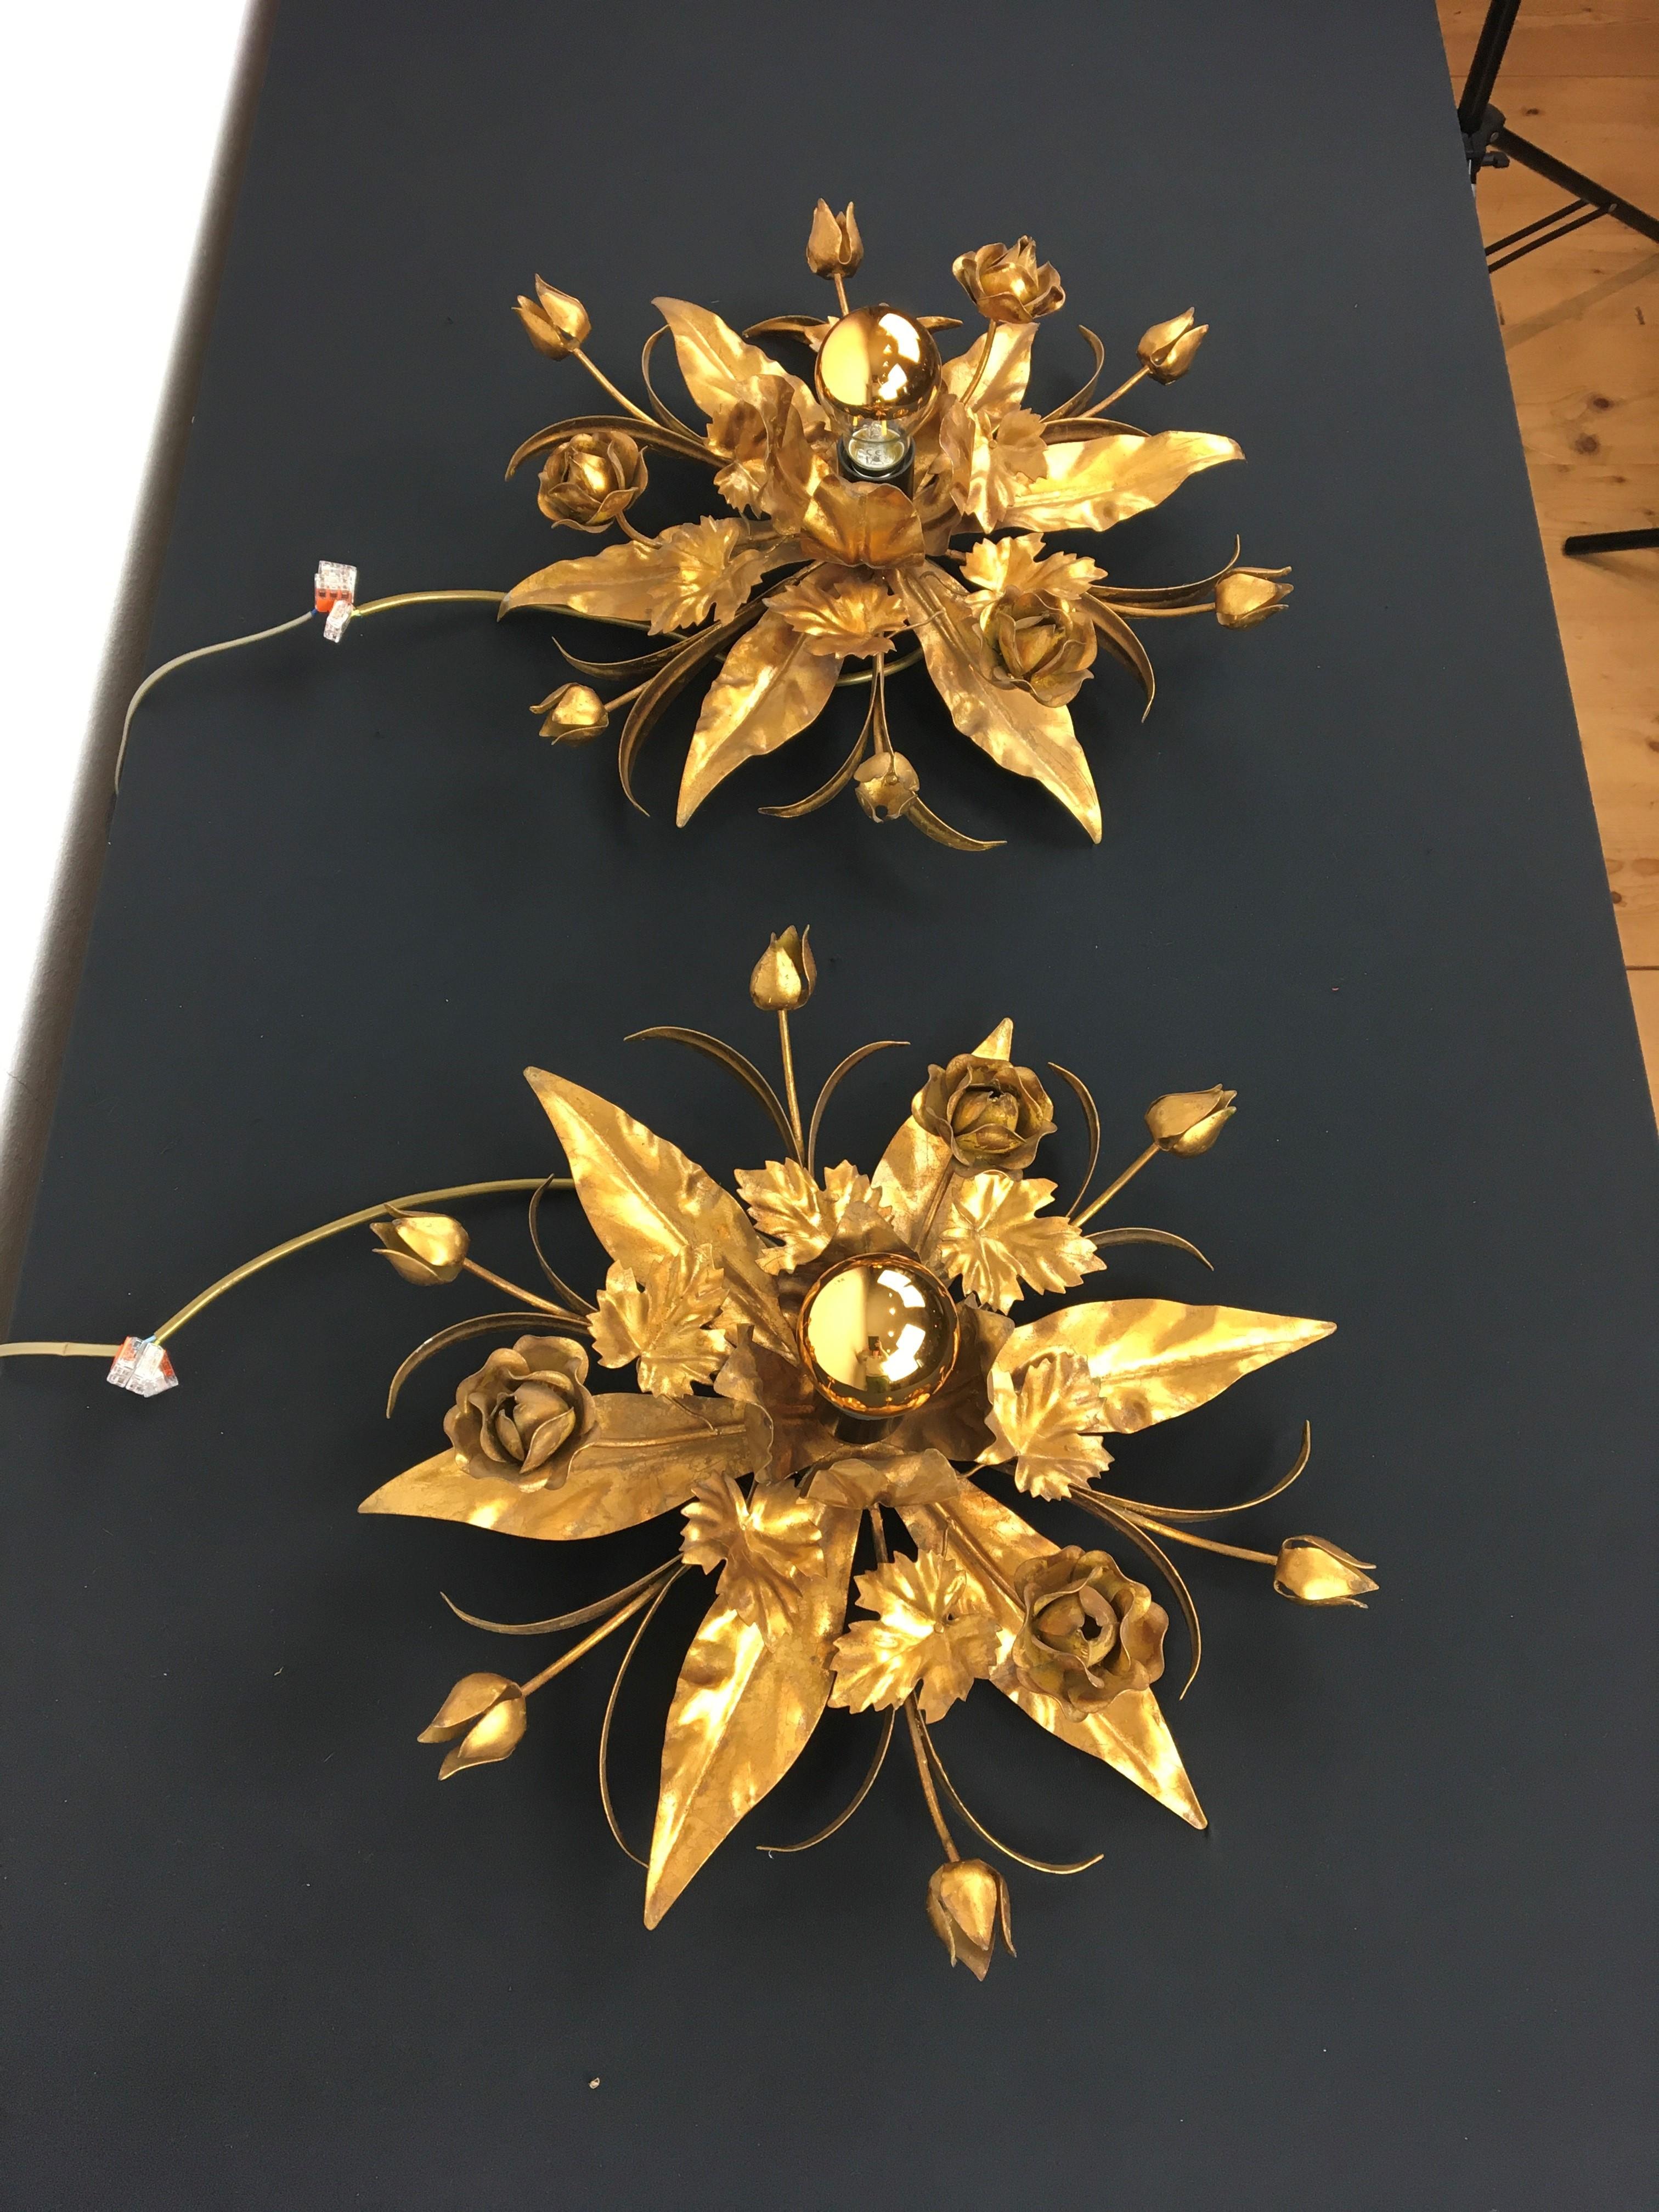 Stylish gilded metal flush mount - ceiling light with flowers. 
Gold leaf flush mount with flowers. Floral ceiling light with leaves and tulip flowers and roses. Gilded metal - gold leaf flower lighting. 
They have 1 light point in the middle with